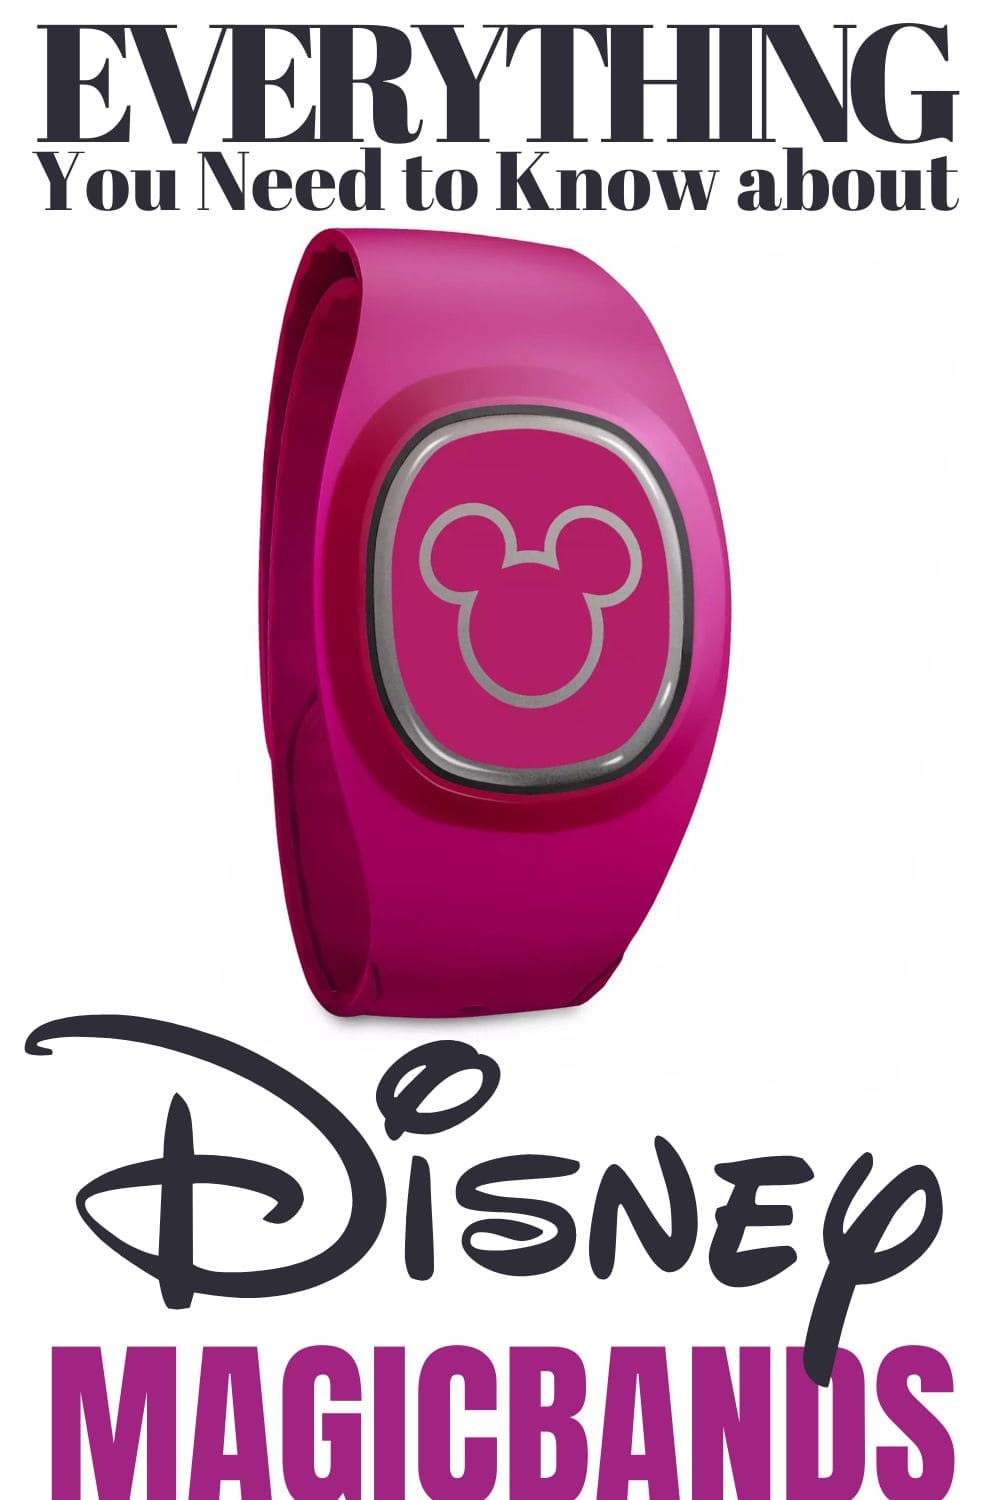 Disney MagicBand+ (Everything You Need to Know)